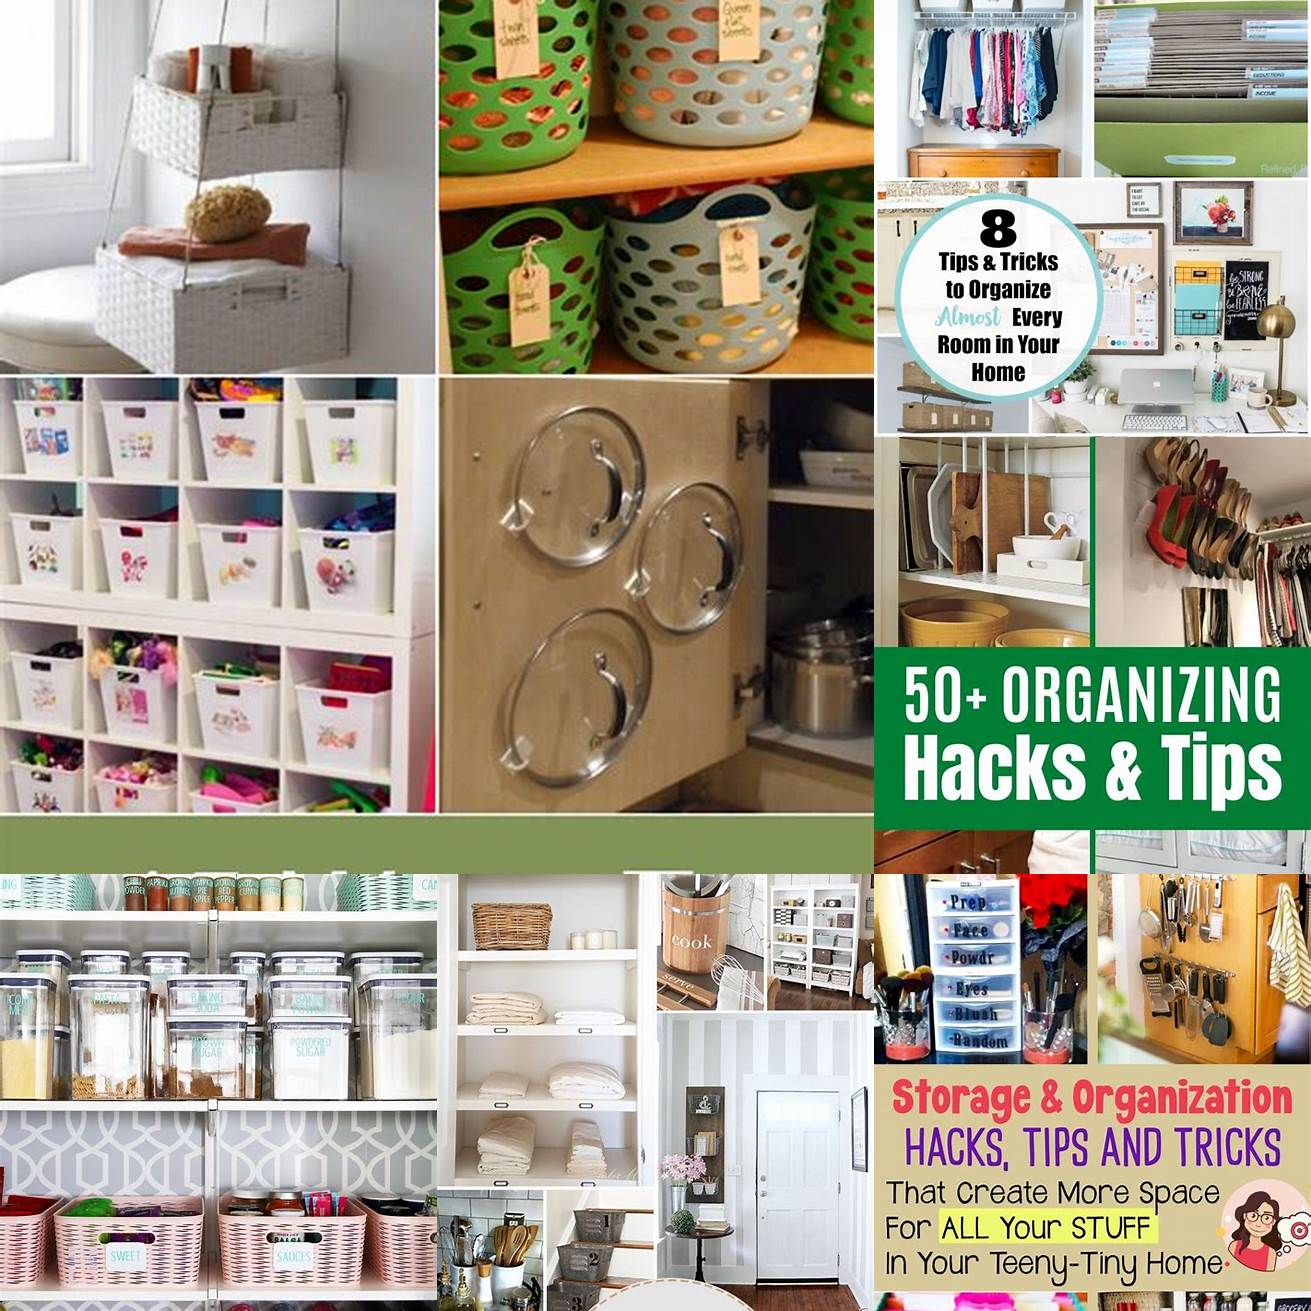 1 Organize your items